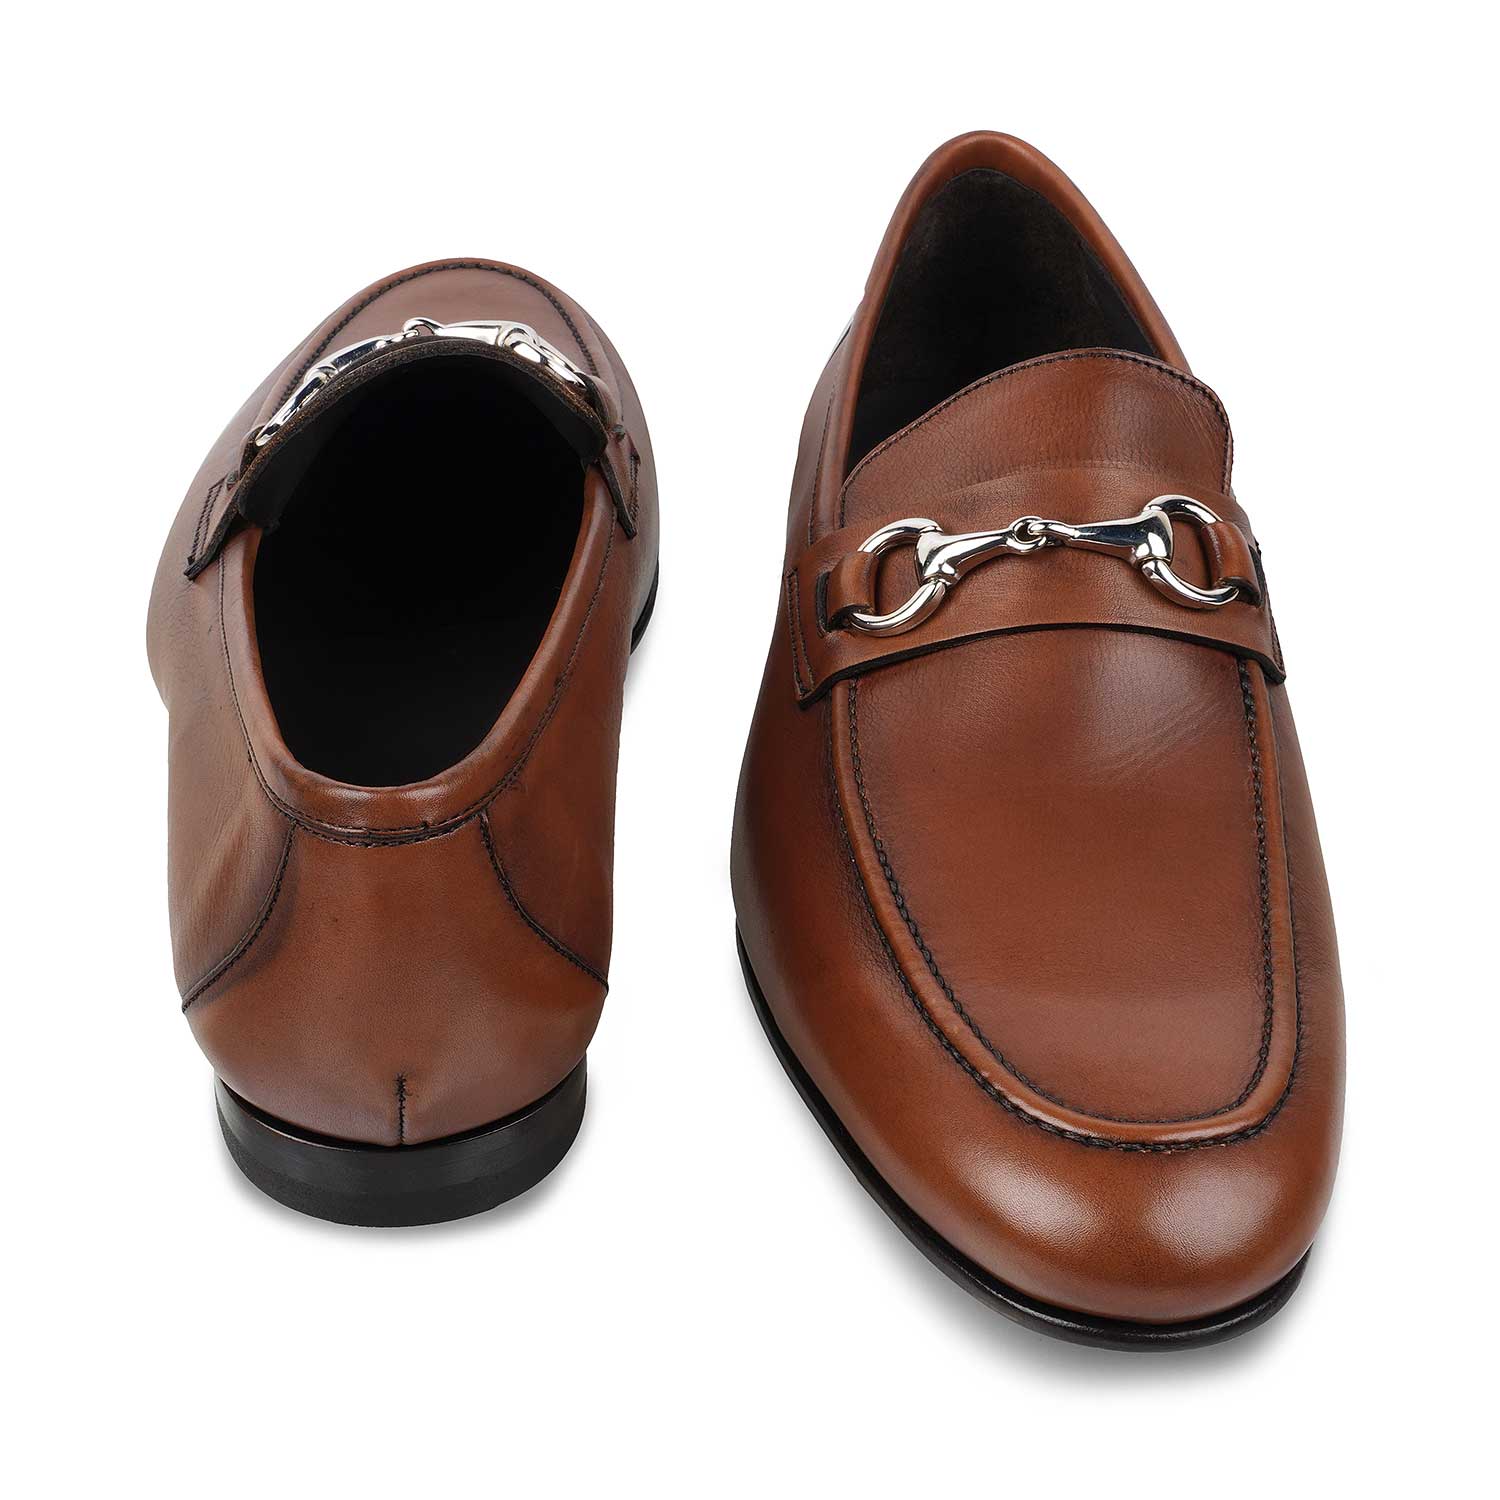 The Malco Tan Men's Handcrafted Leather Loafers Tresmode